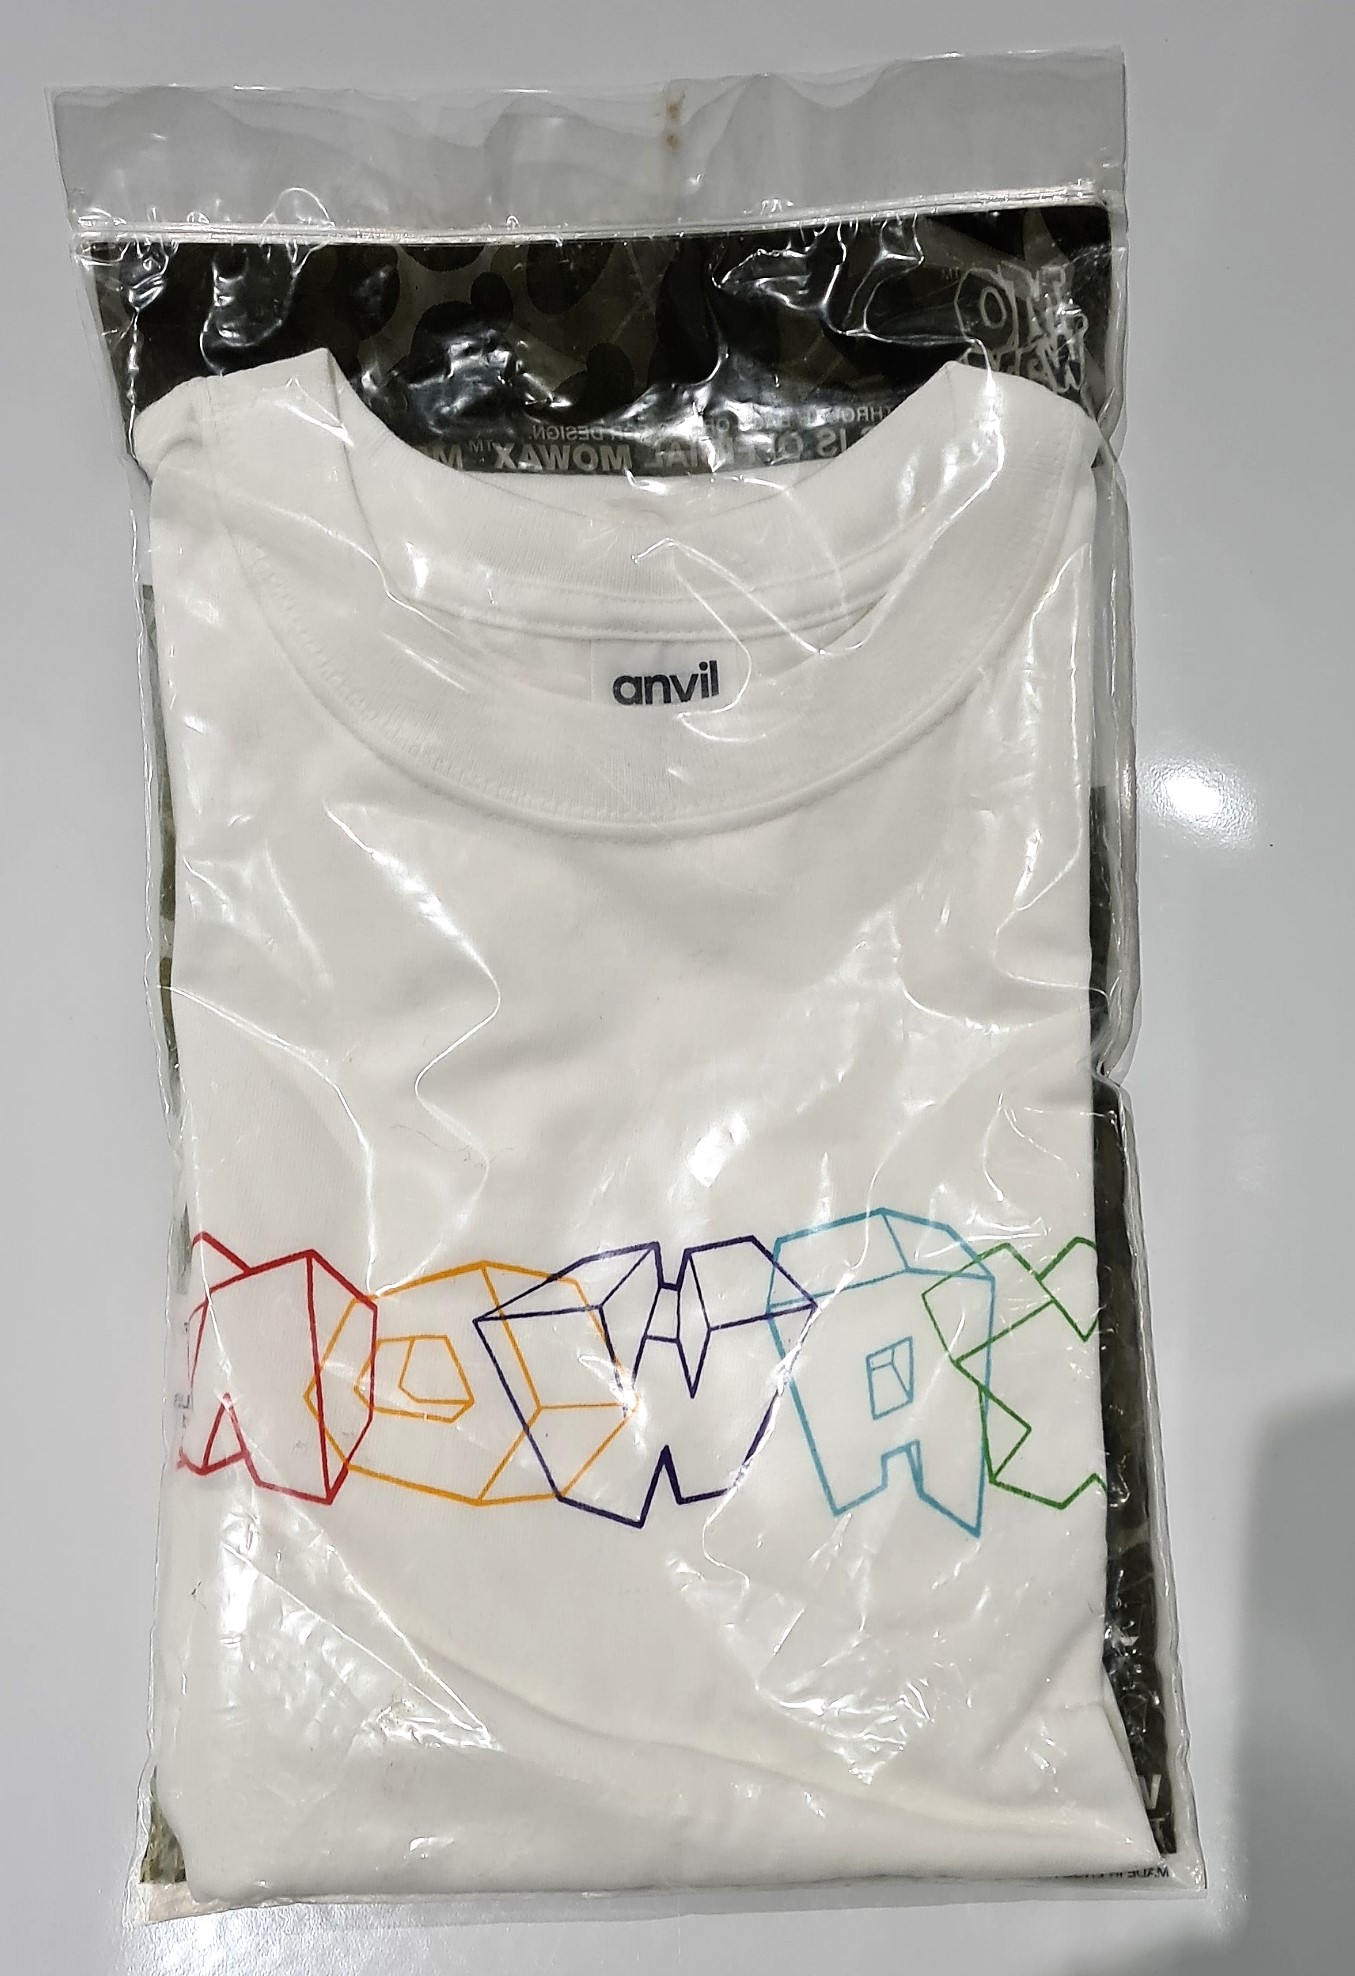 MoWax Wire Logo Front (bagged)